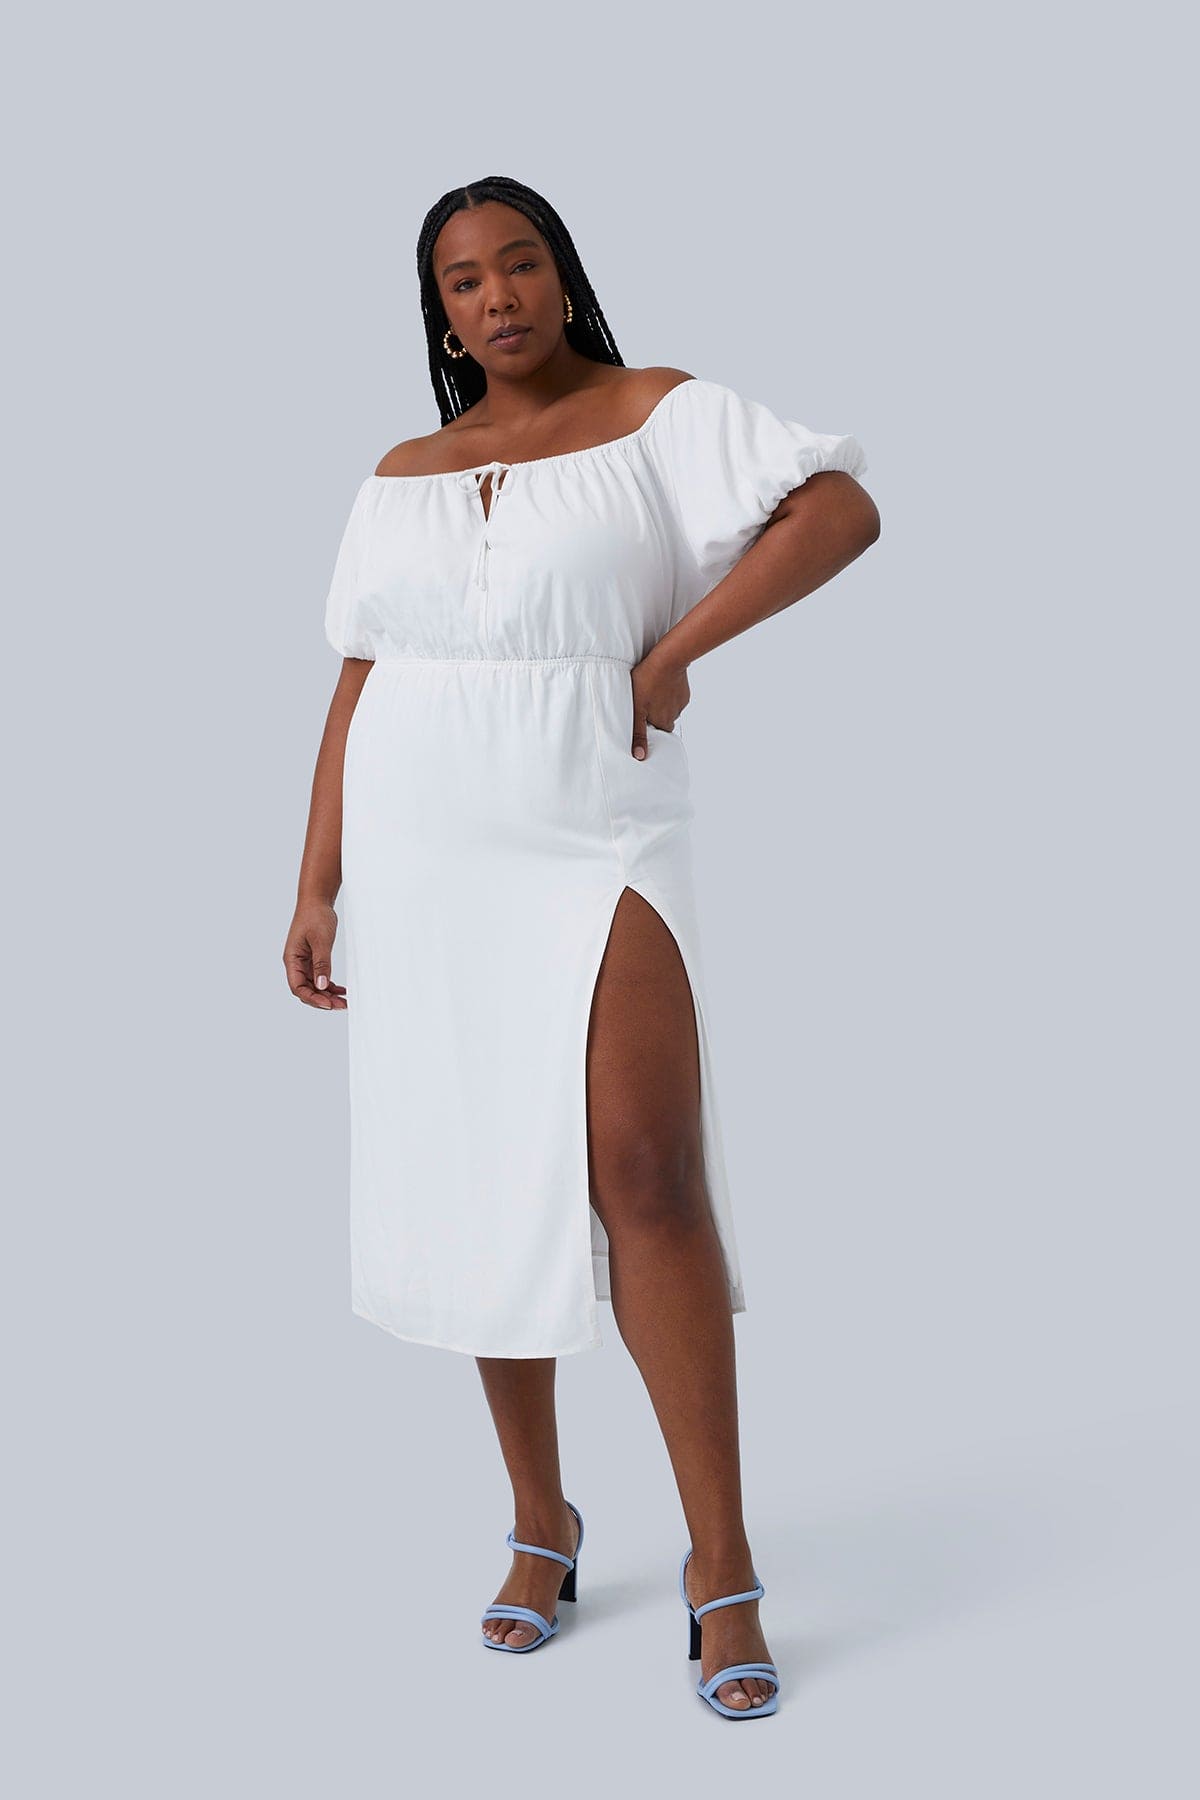 Gia midi dress size 1X is inspired by romantic Italian adventures. Off the Shoulder Midi Dress with Puff Sleeve, Center Front Keyhole with Ties, Thigh High Slit. Plus size model has hand on her hip and leg stepping forward to highlight the slit.